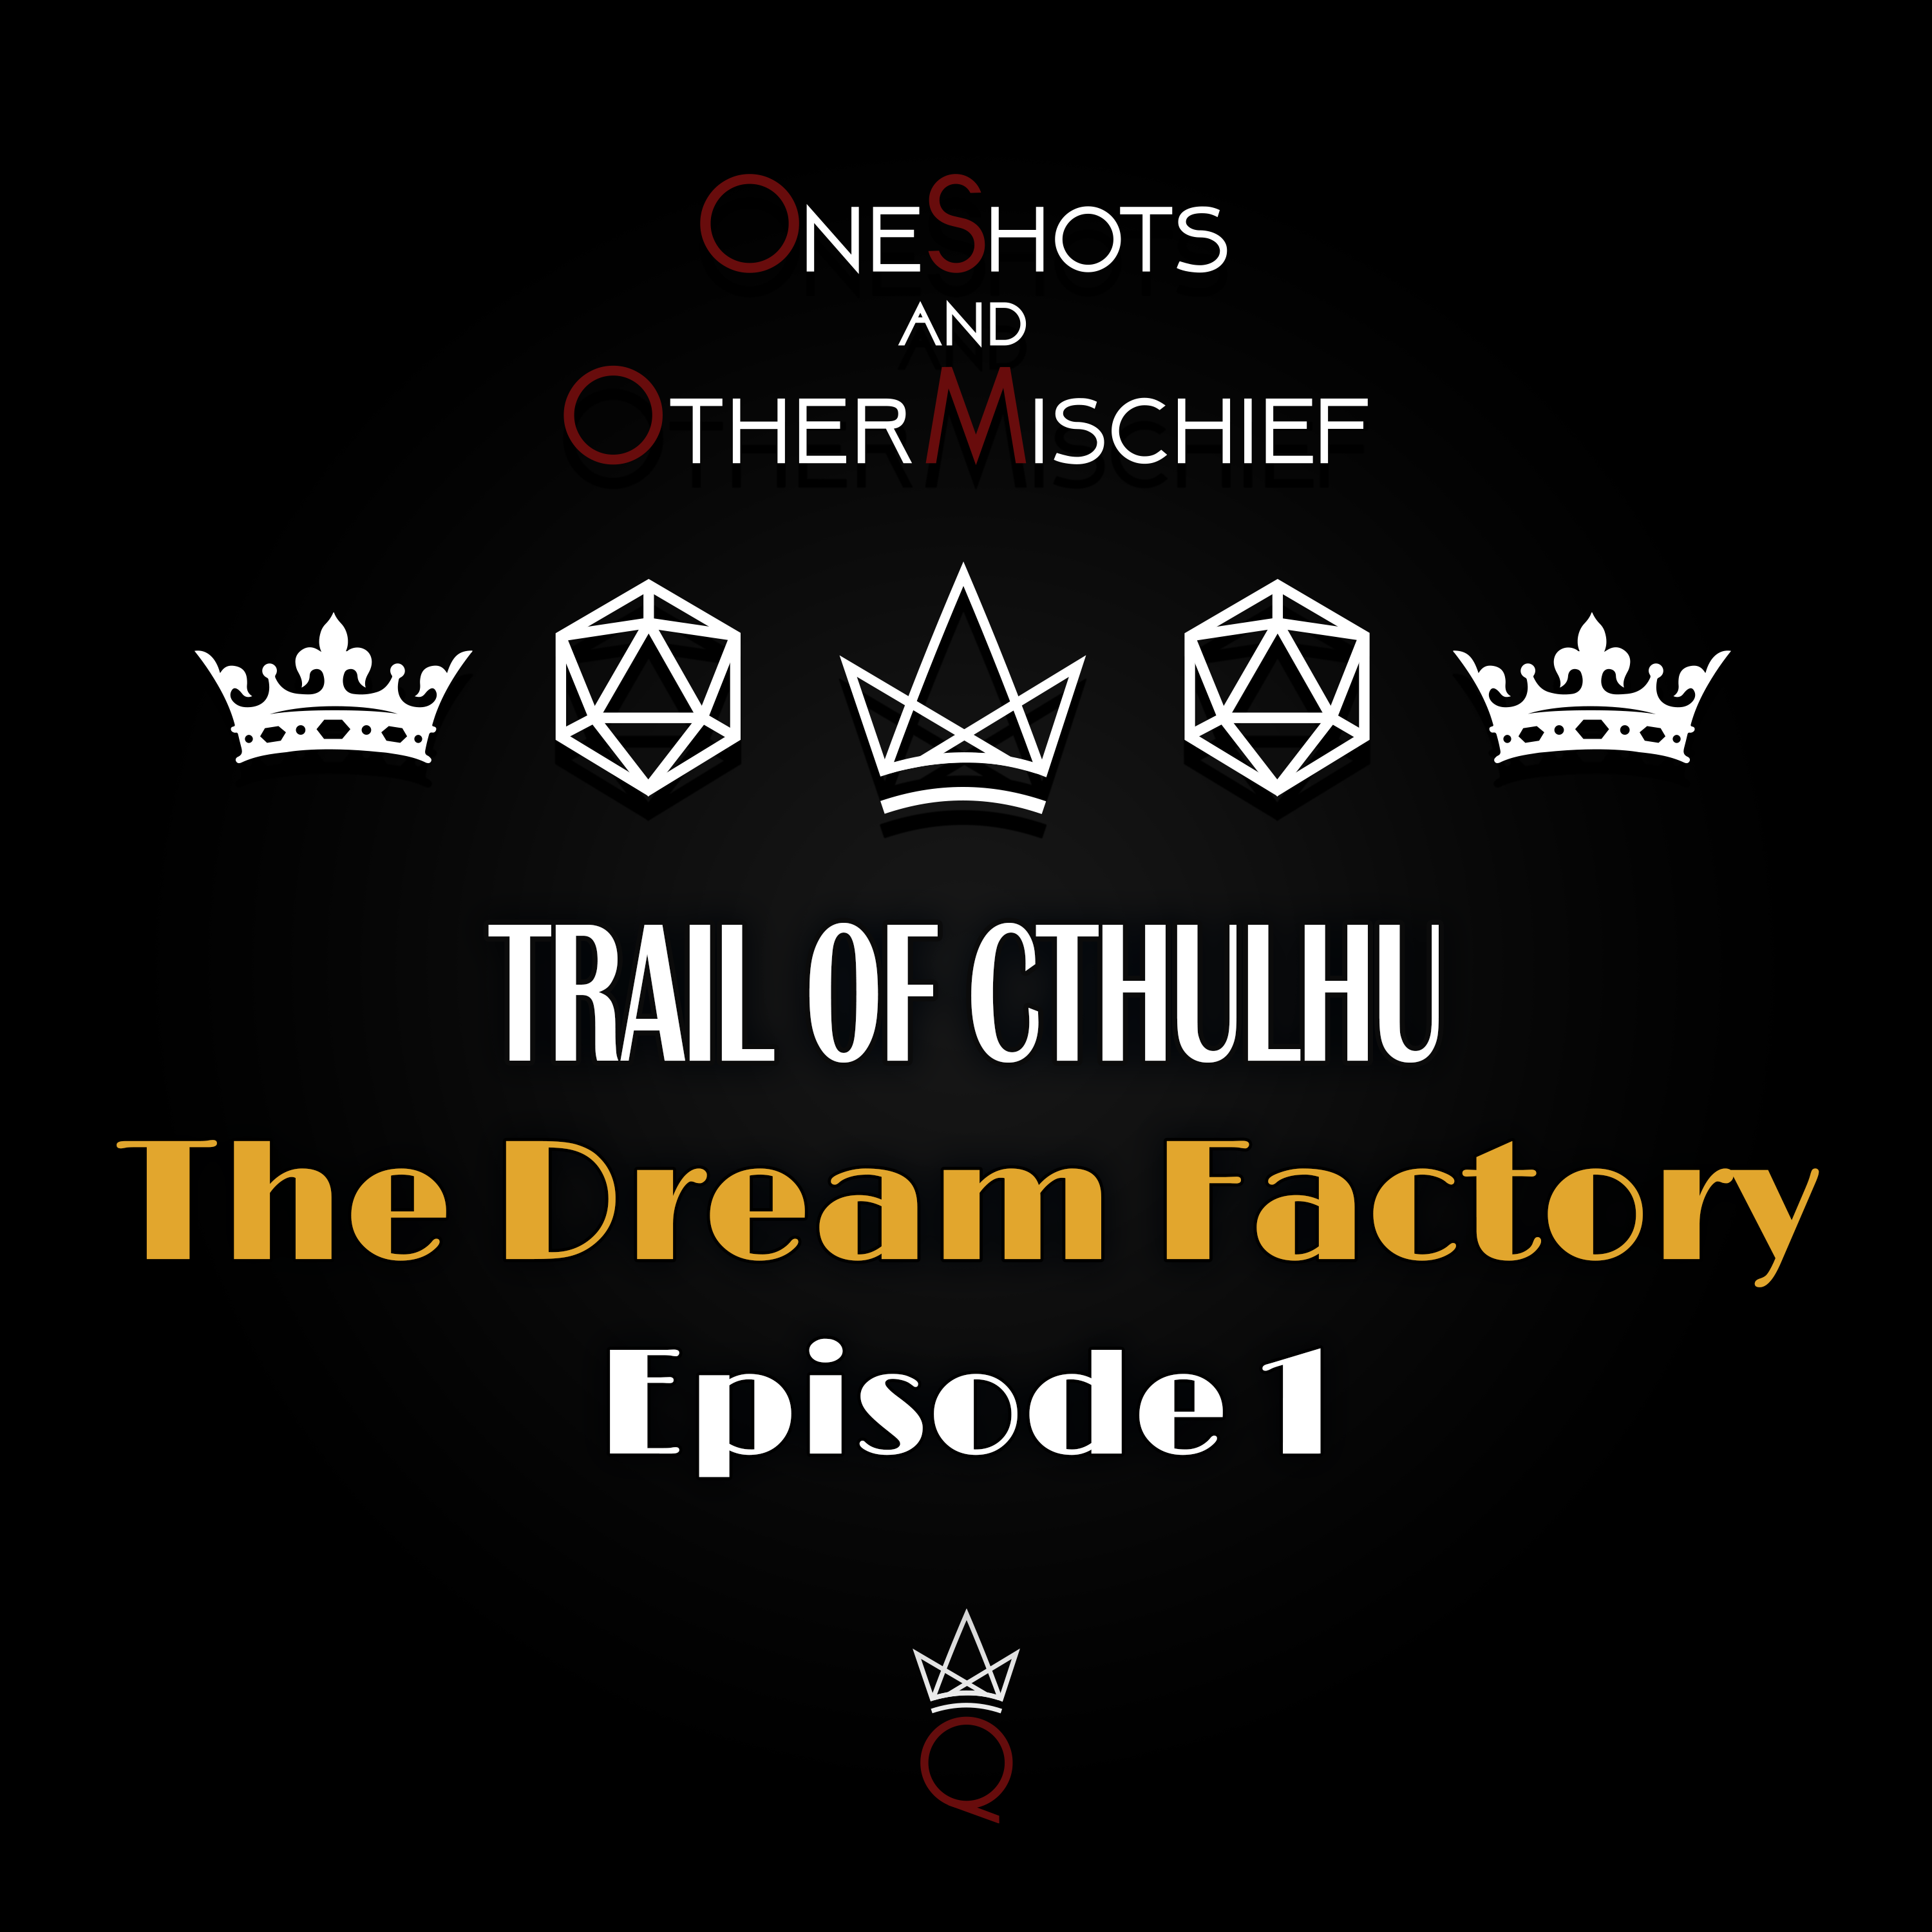 Trail of Cthulhu - The Dream Factory, Episode 1